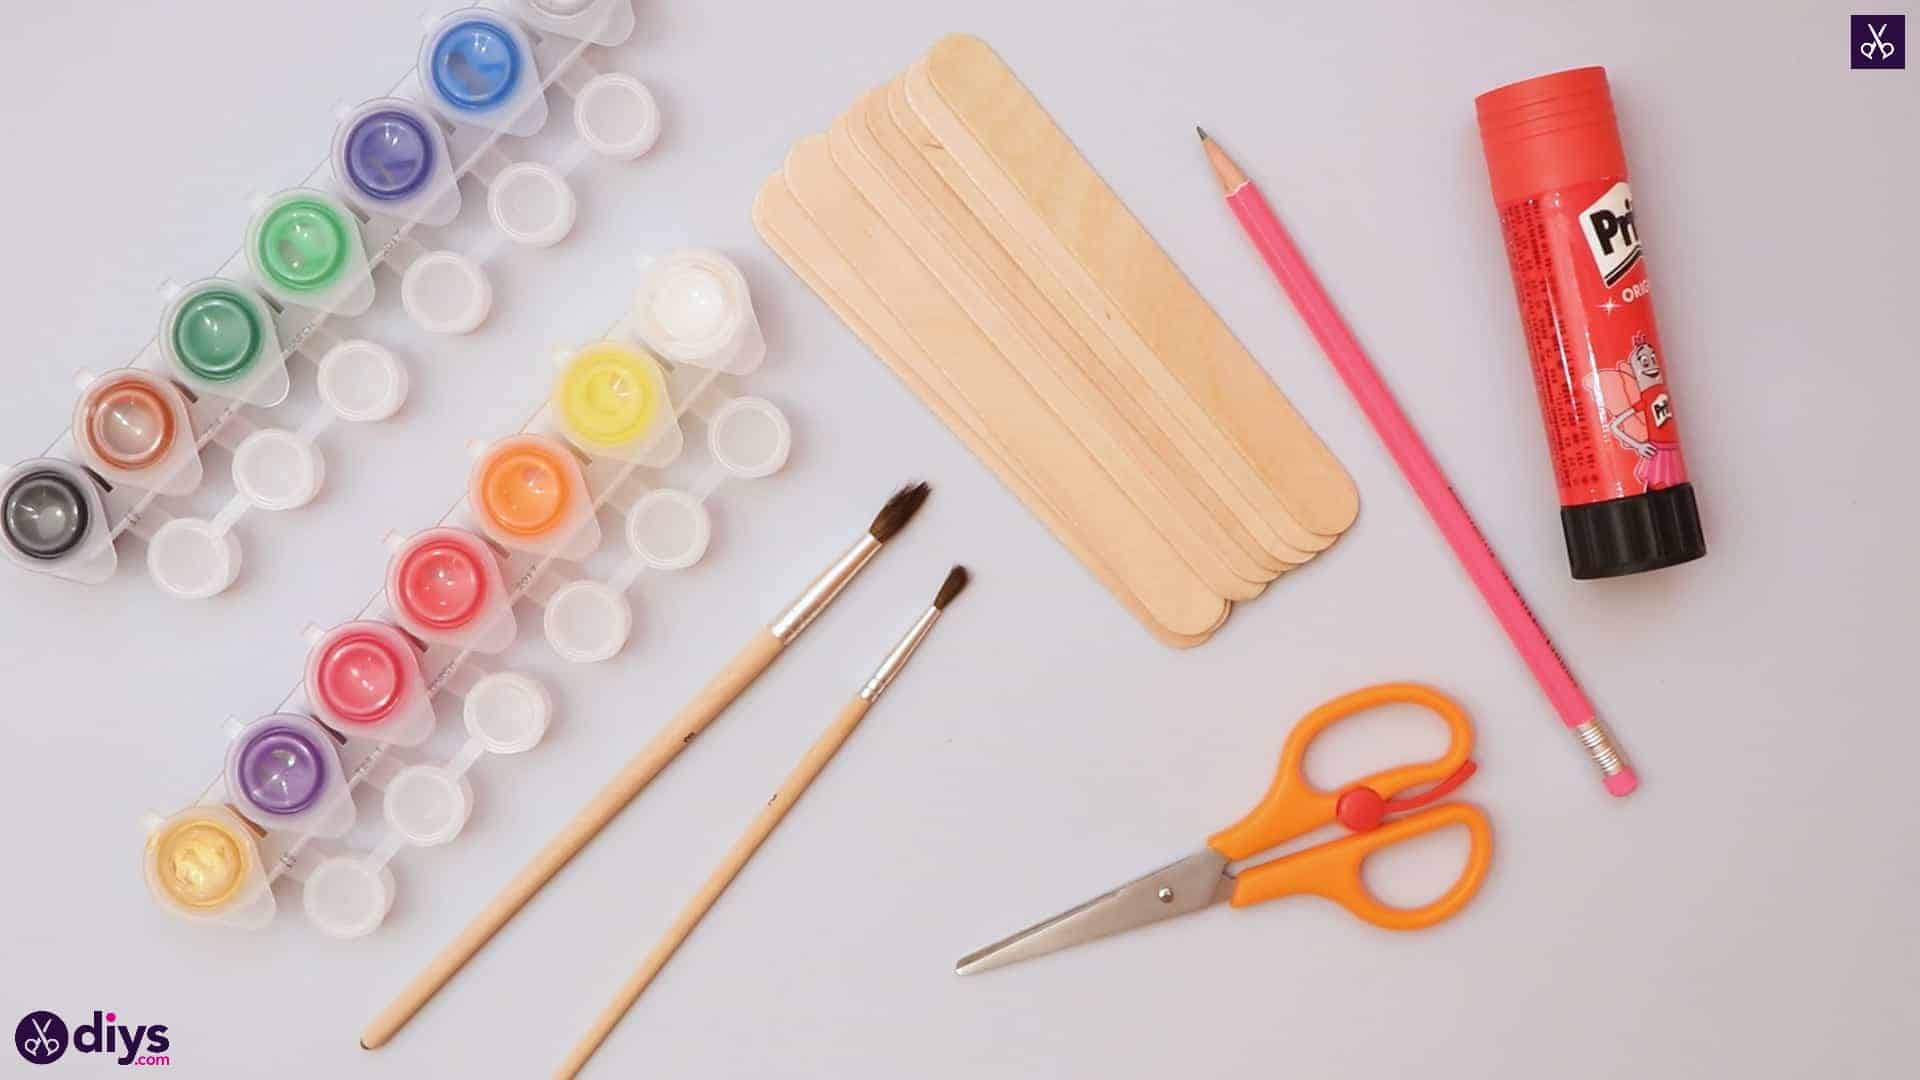 Diy popsicle stick house materials